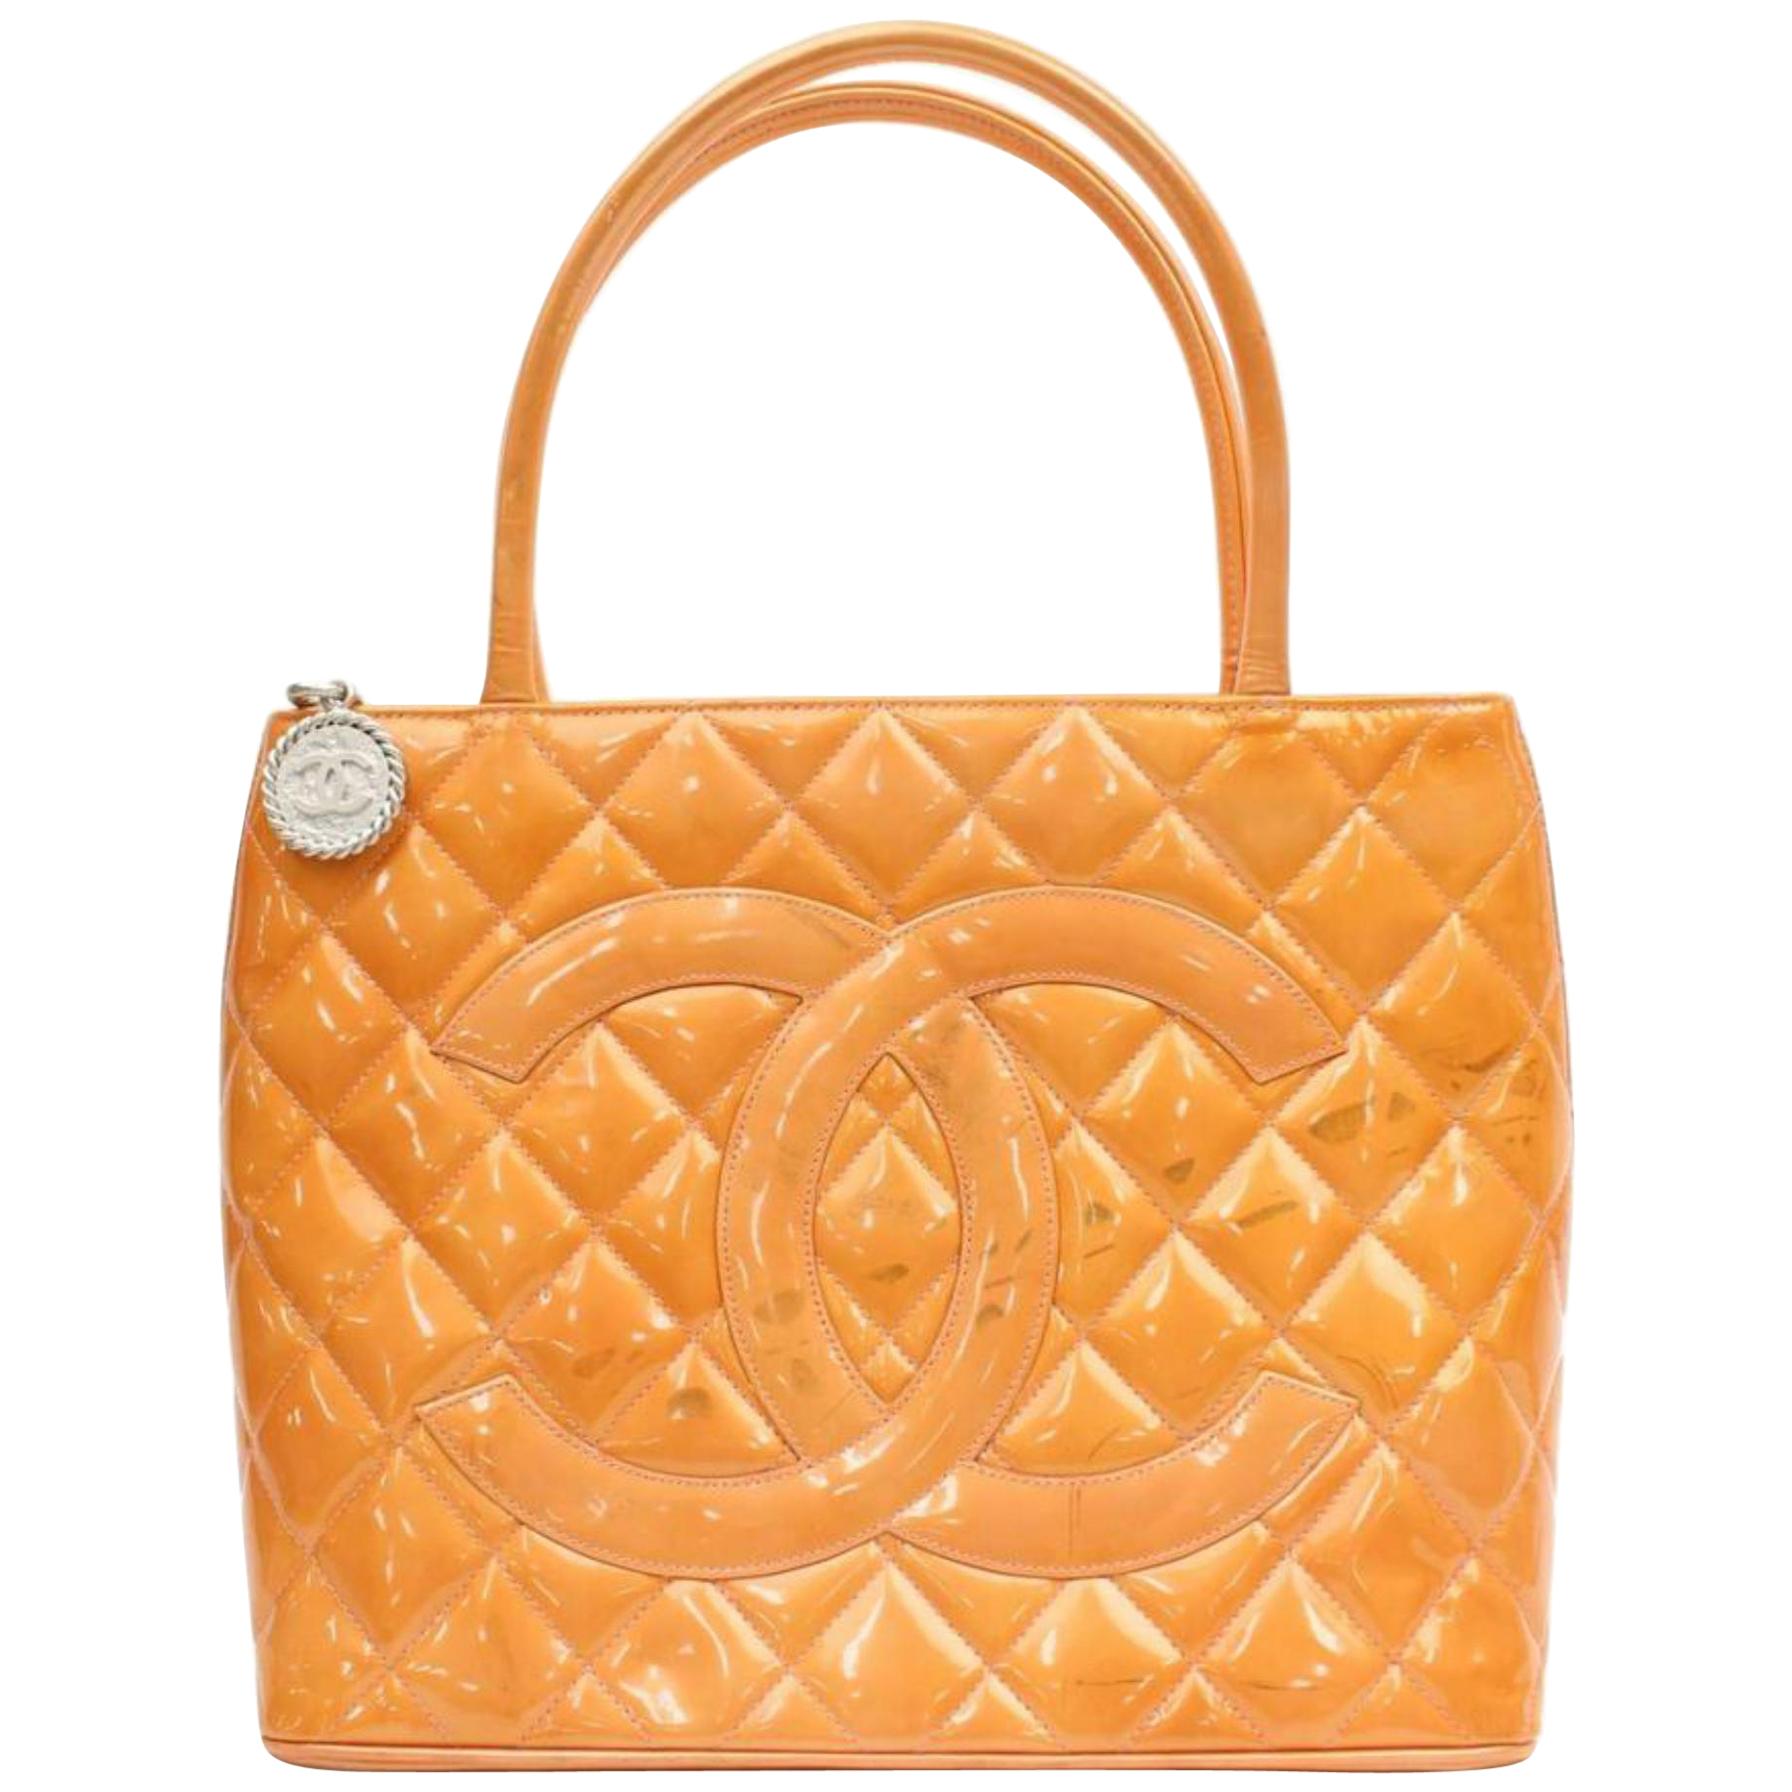 Chanel Médallion Quilted Zip Tote 868715 Orange Patent Leather Satchel For Sale